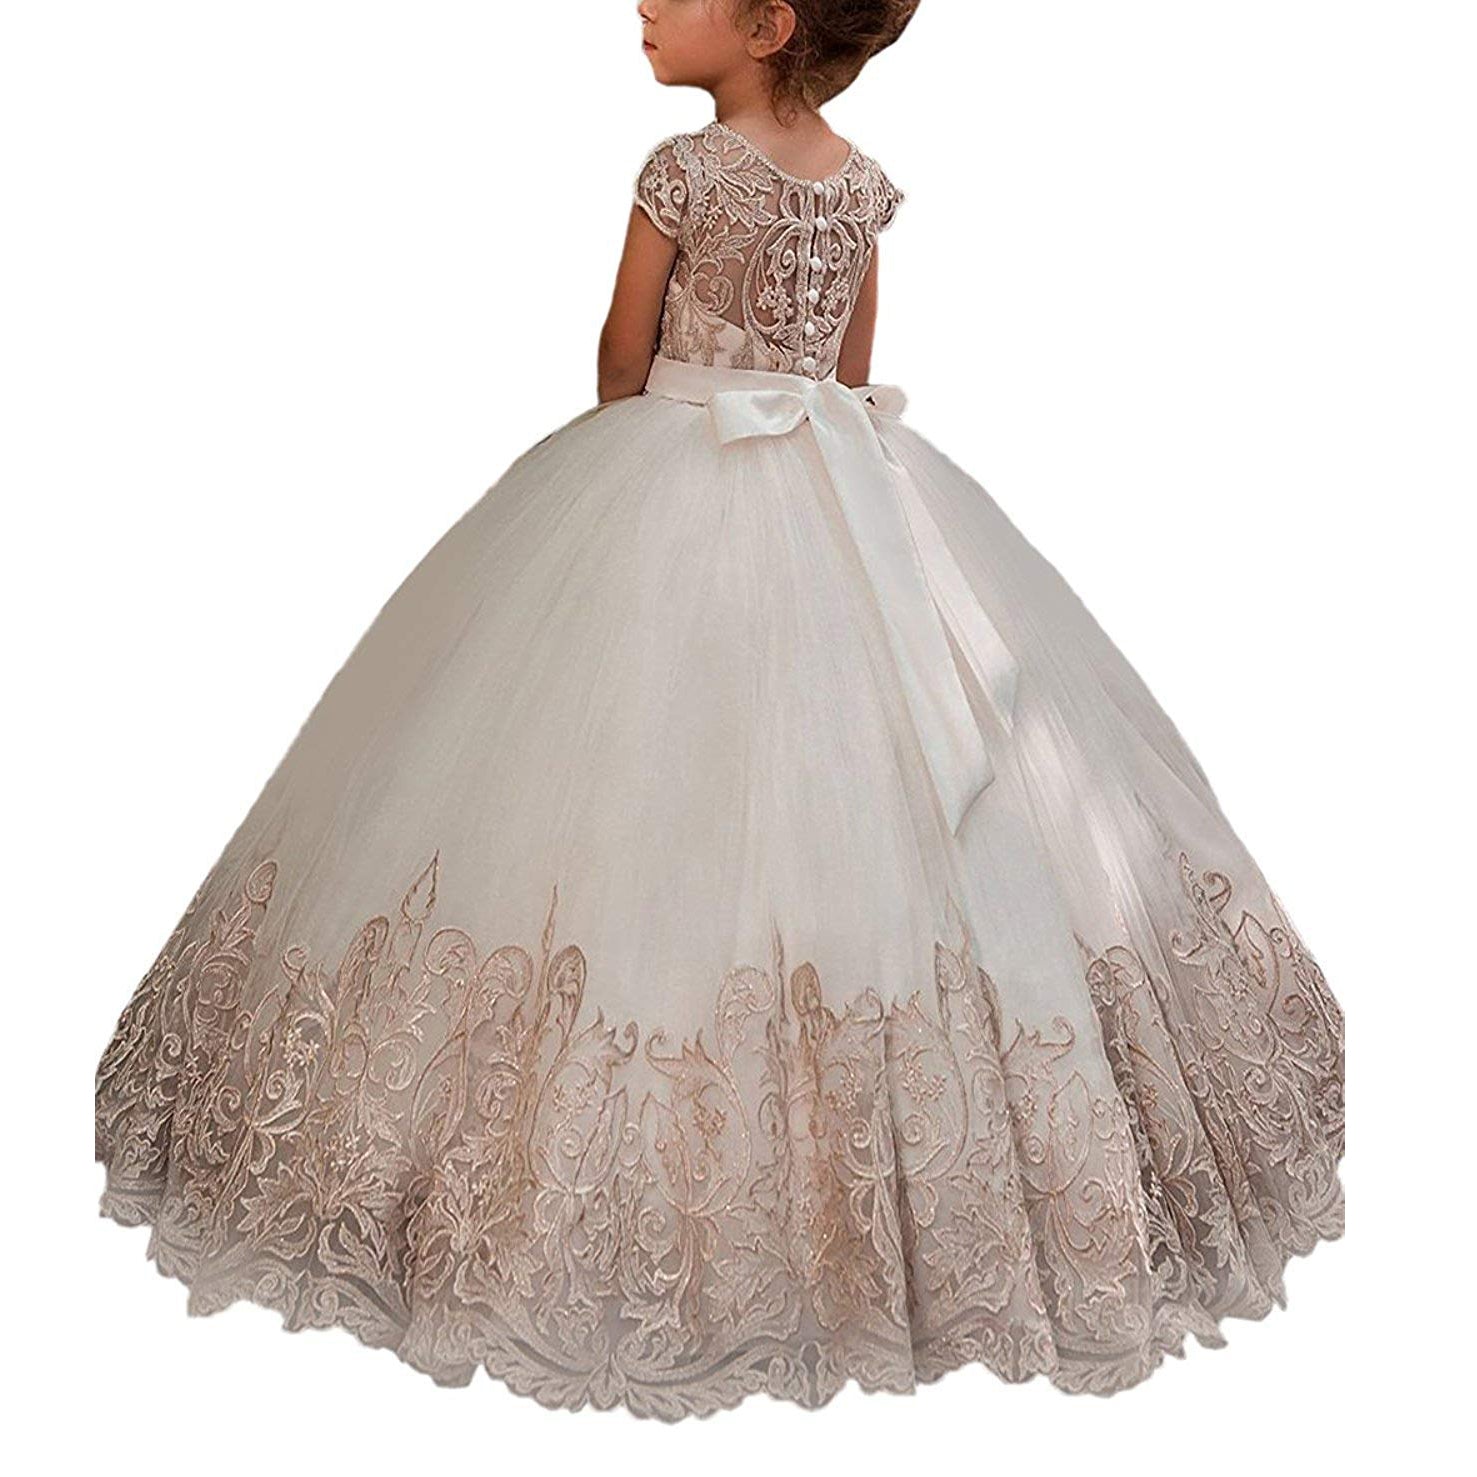 Flower Girl Dresses for Wedding Short Sleeve Lace Appliques Buttons Back Pageant Dresses Ball Gowns Princess Birthday Dresses